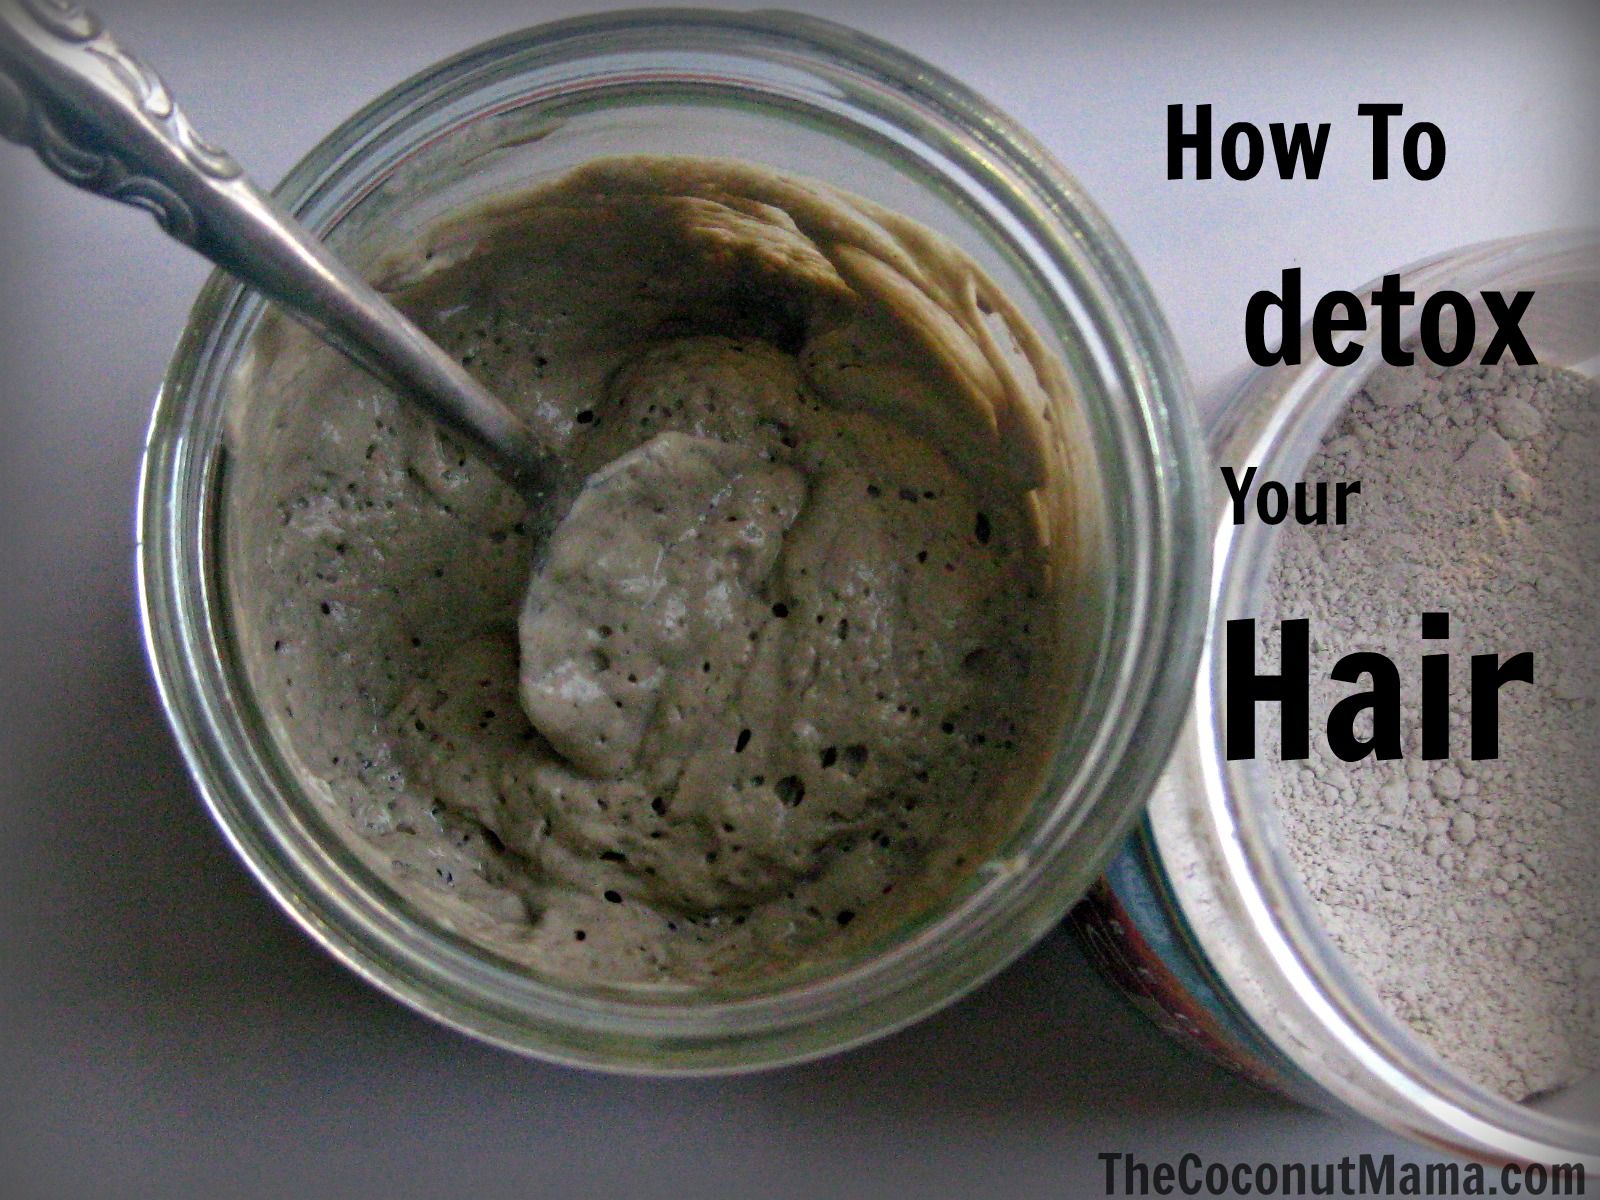 How To Detox Your Hair